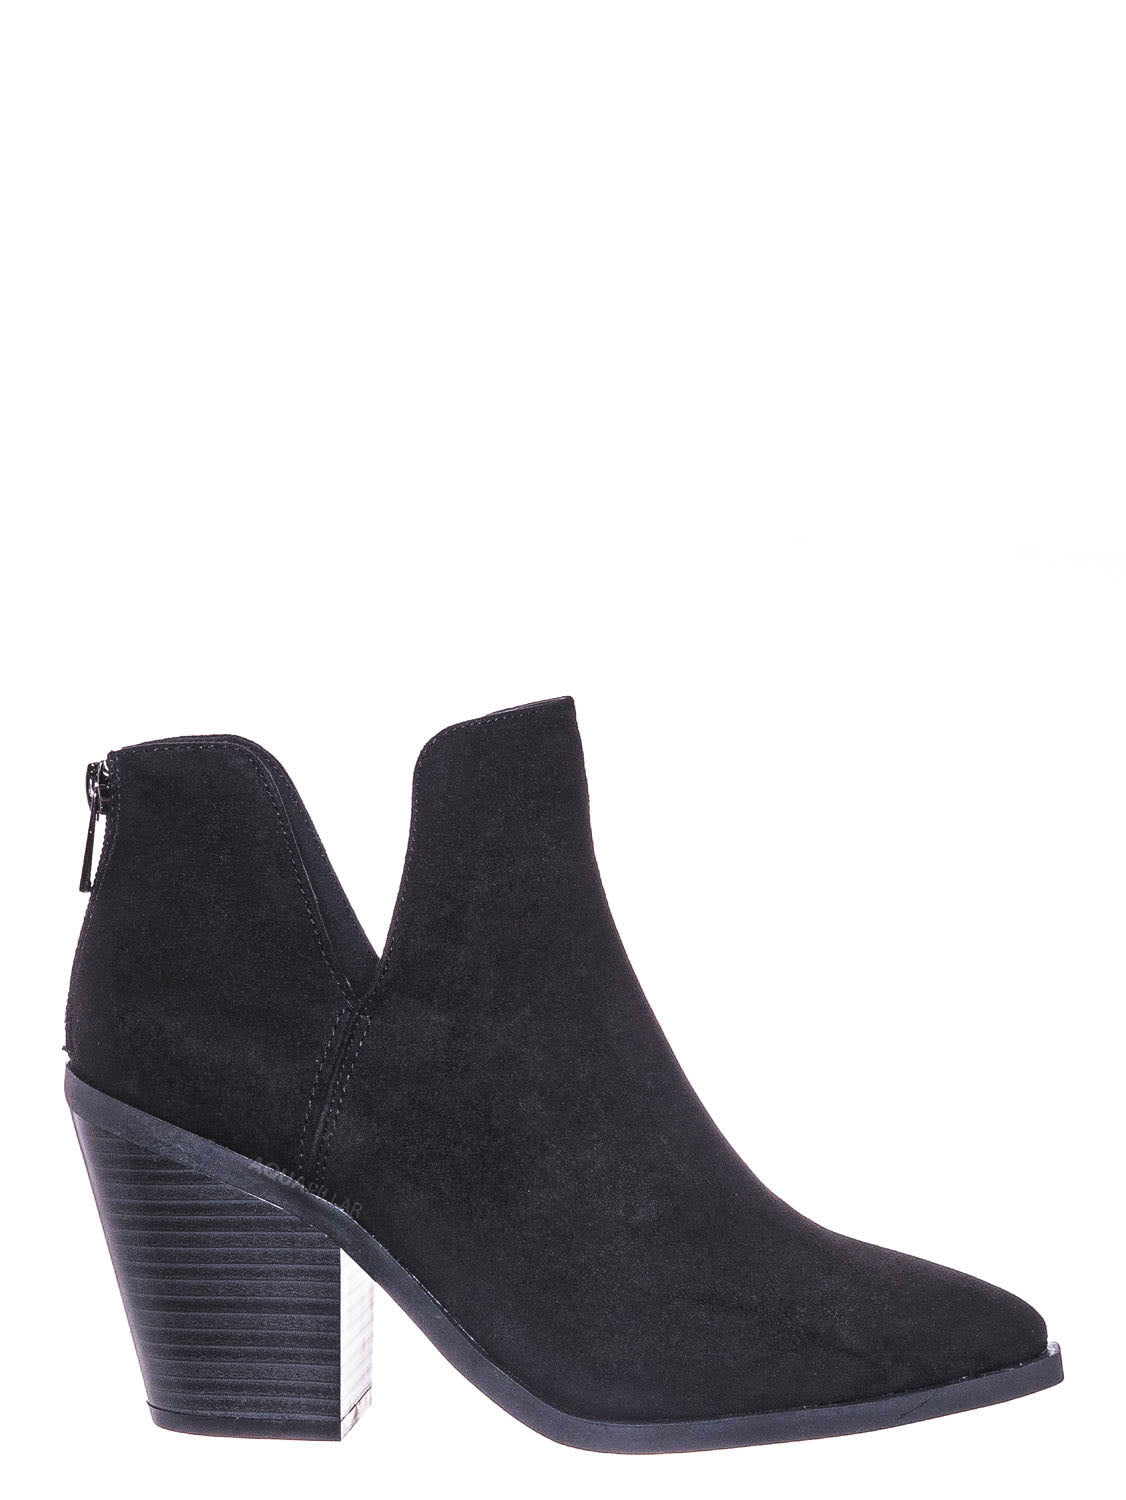 Black Faux Suede / Upstream01 Block Heel Side Cutout Bootie - Womens Double V-Cut Ankle Boots